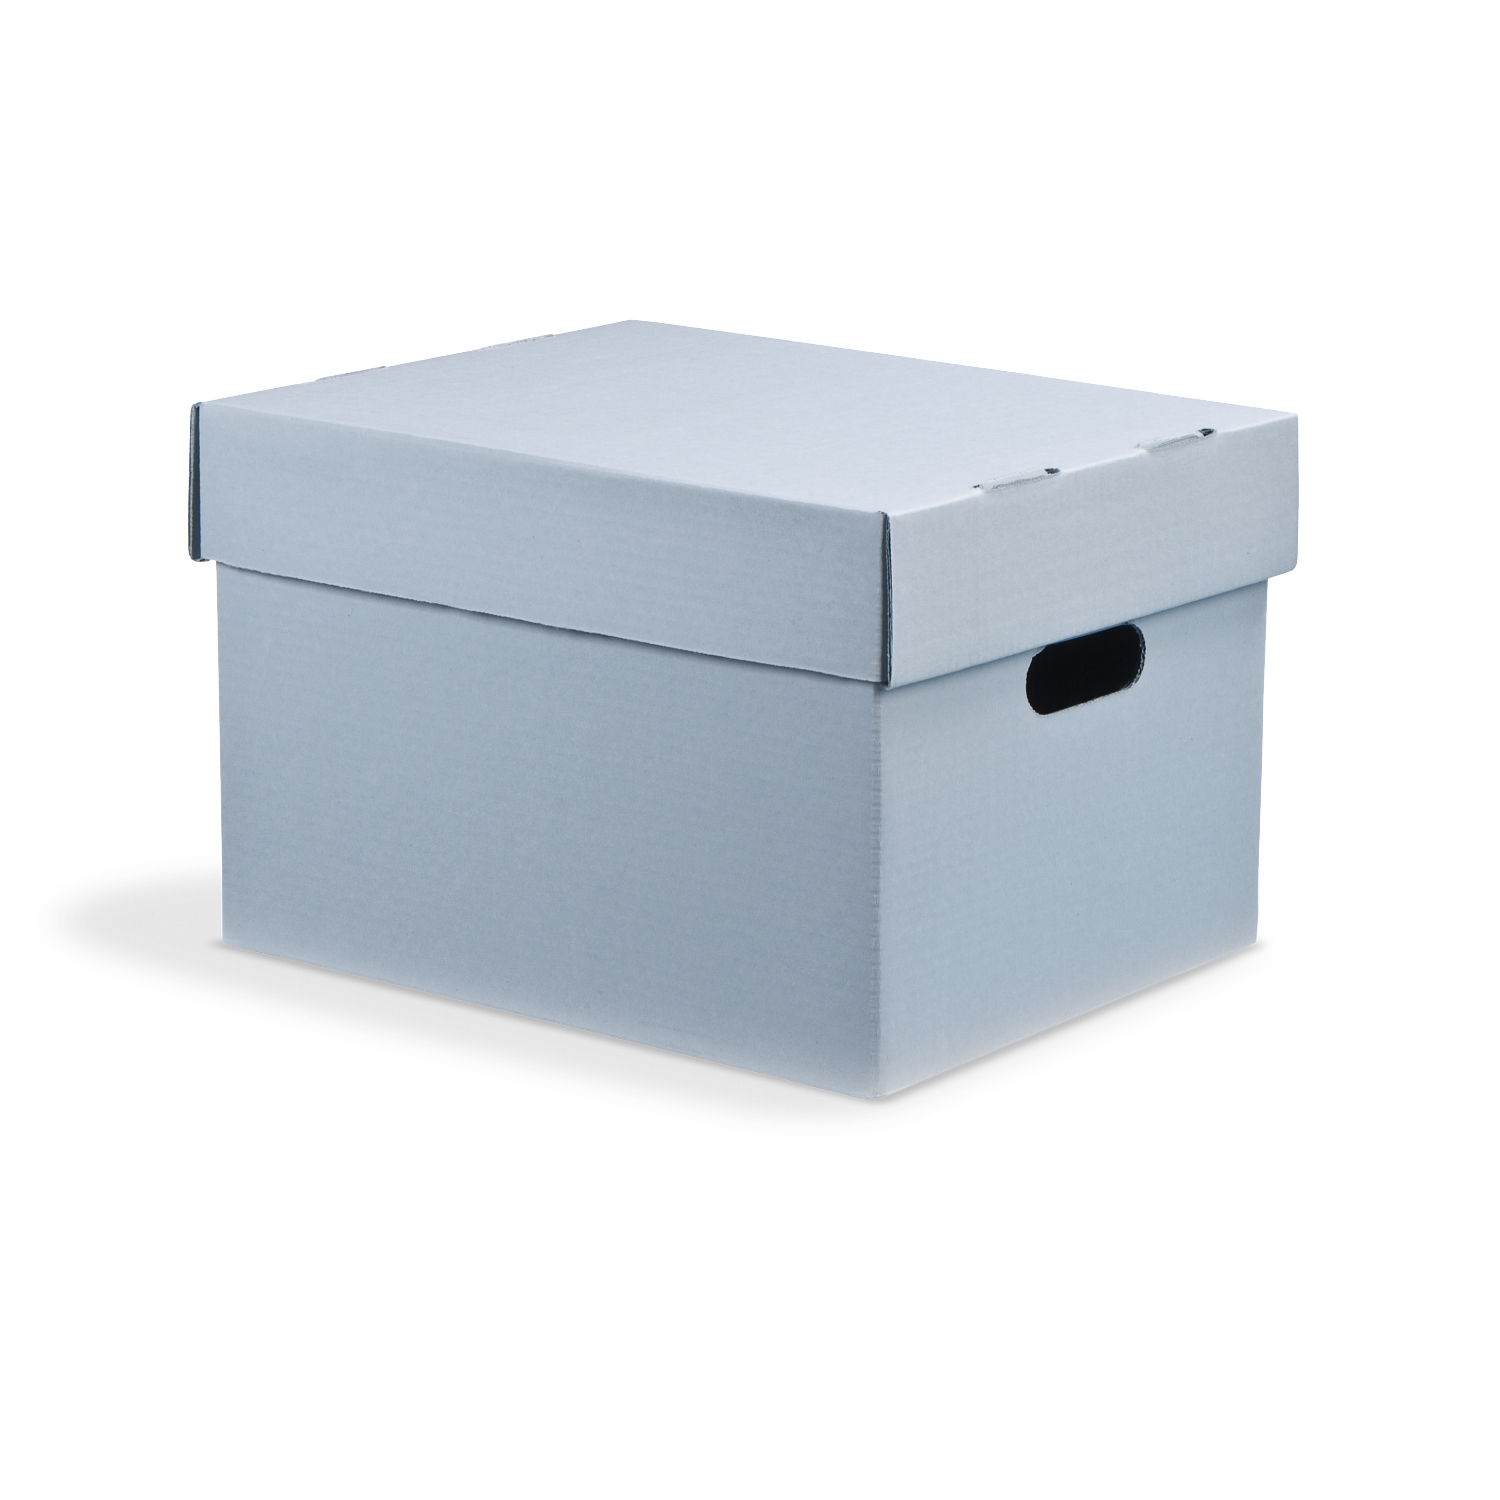 Archive Filing Box completely acid-free for long term archival storage of  documents - Preservation Equipment Ltd